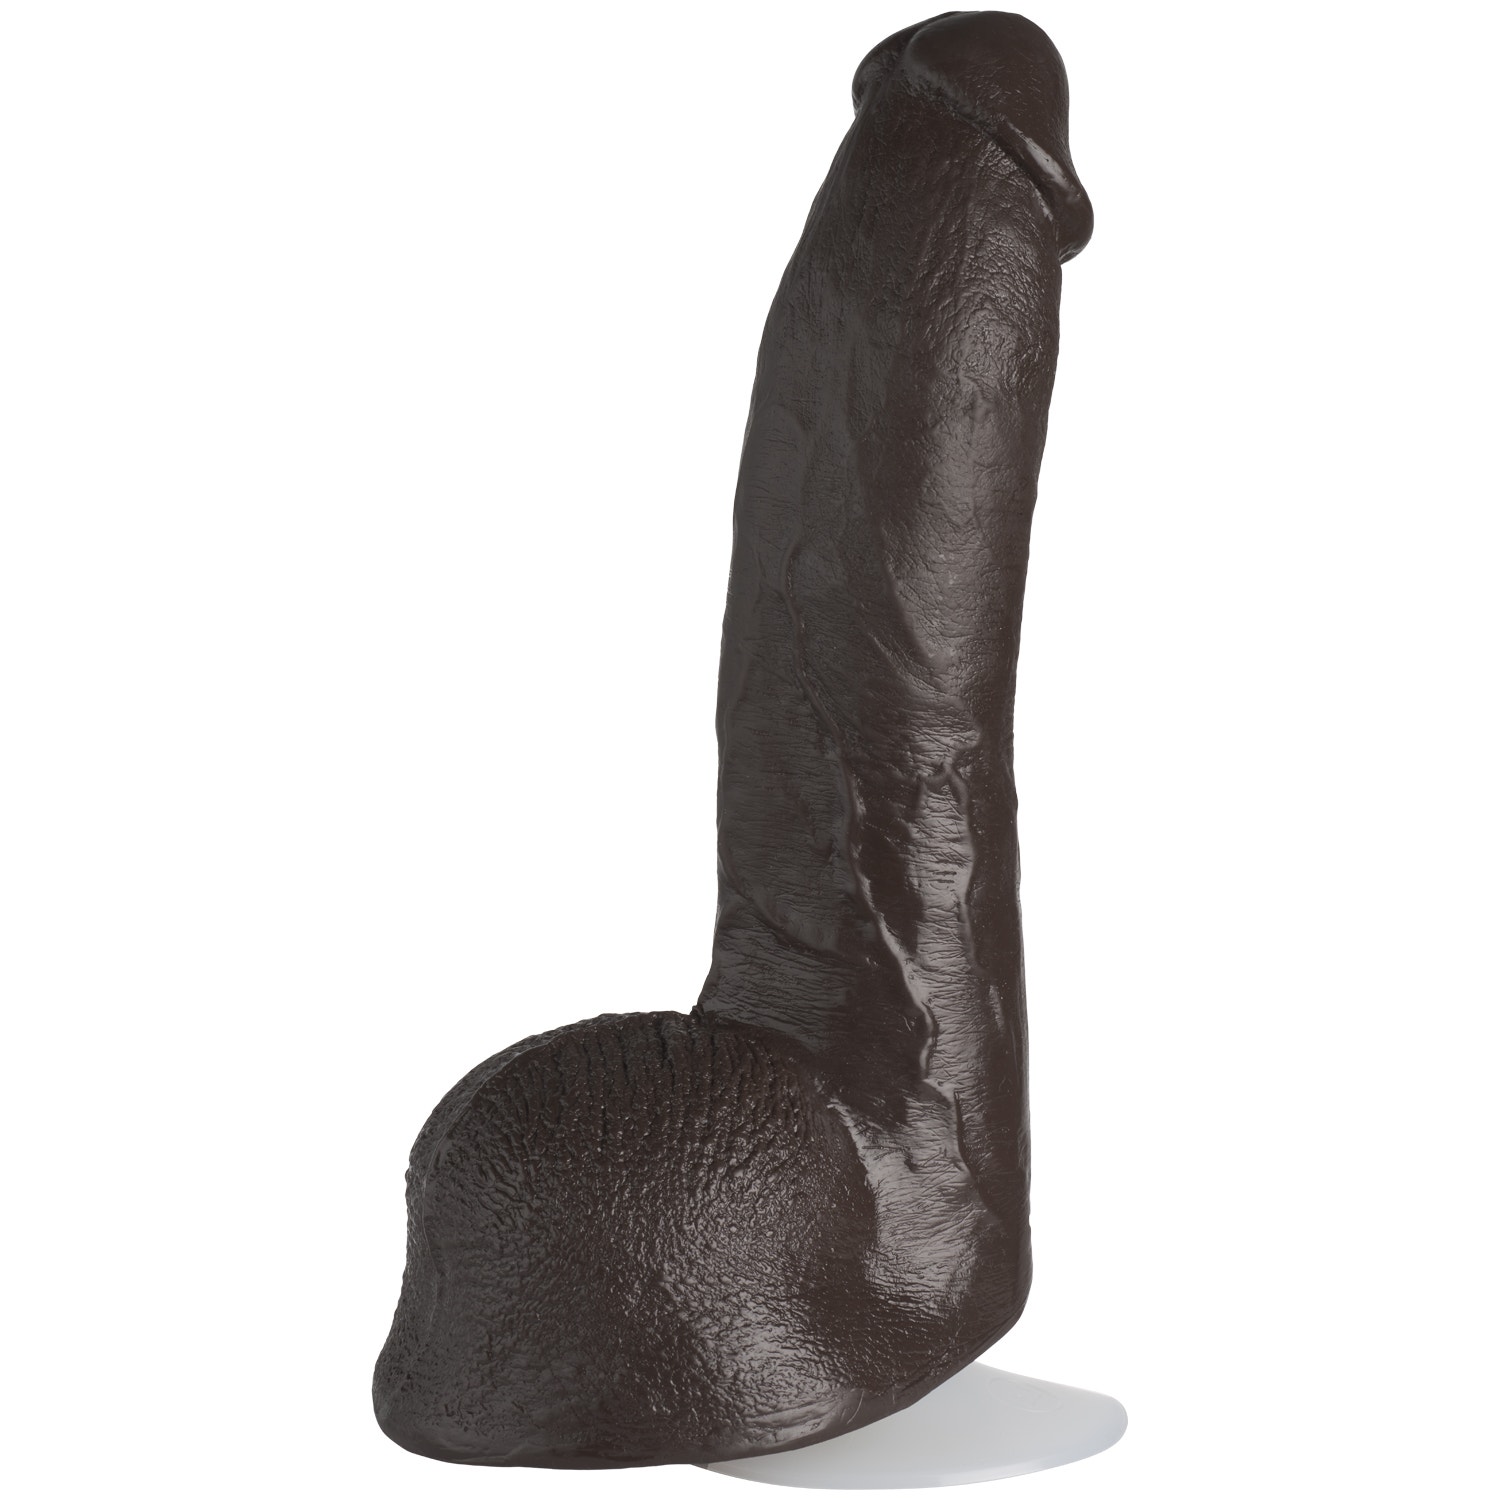 chris seifrit recommends mr marcus dildo pic